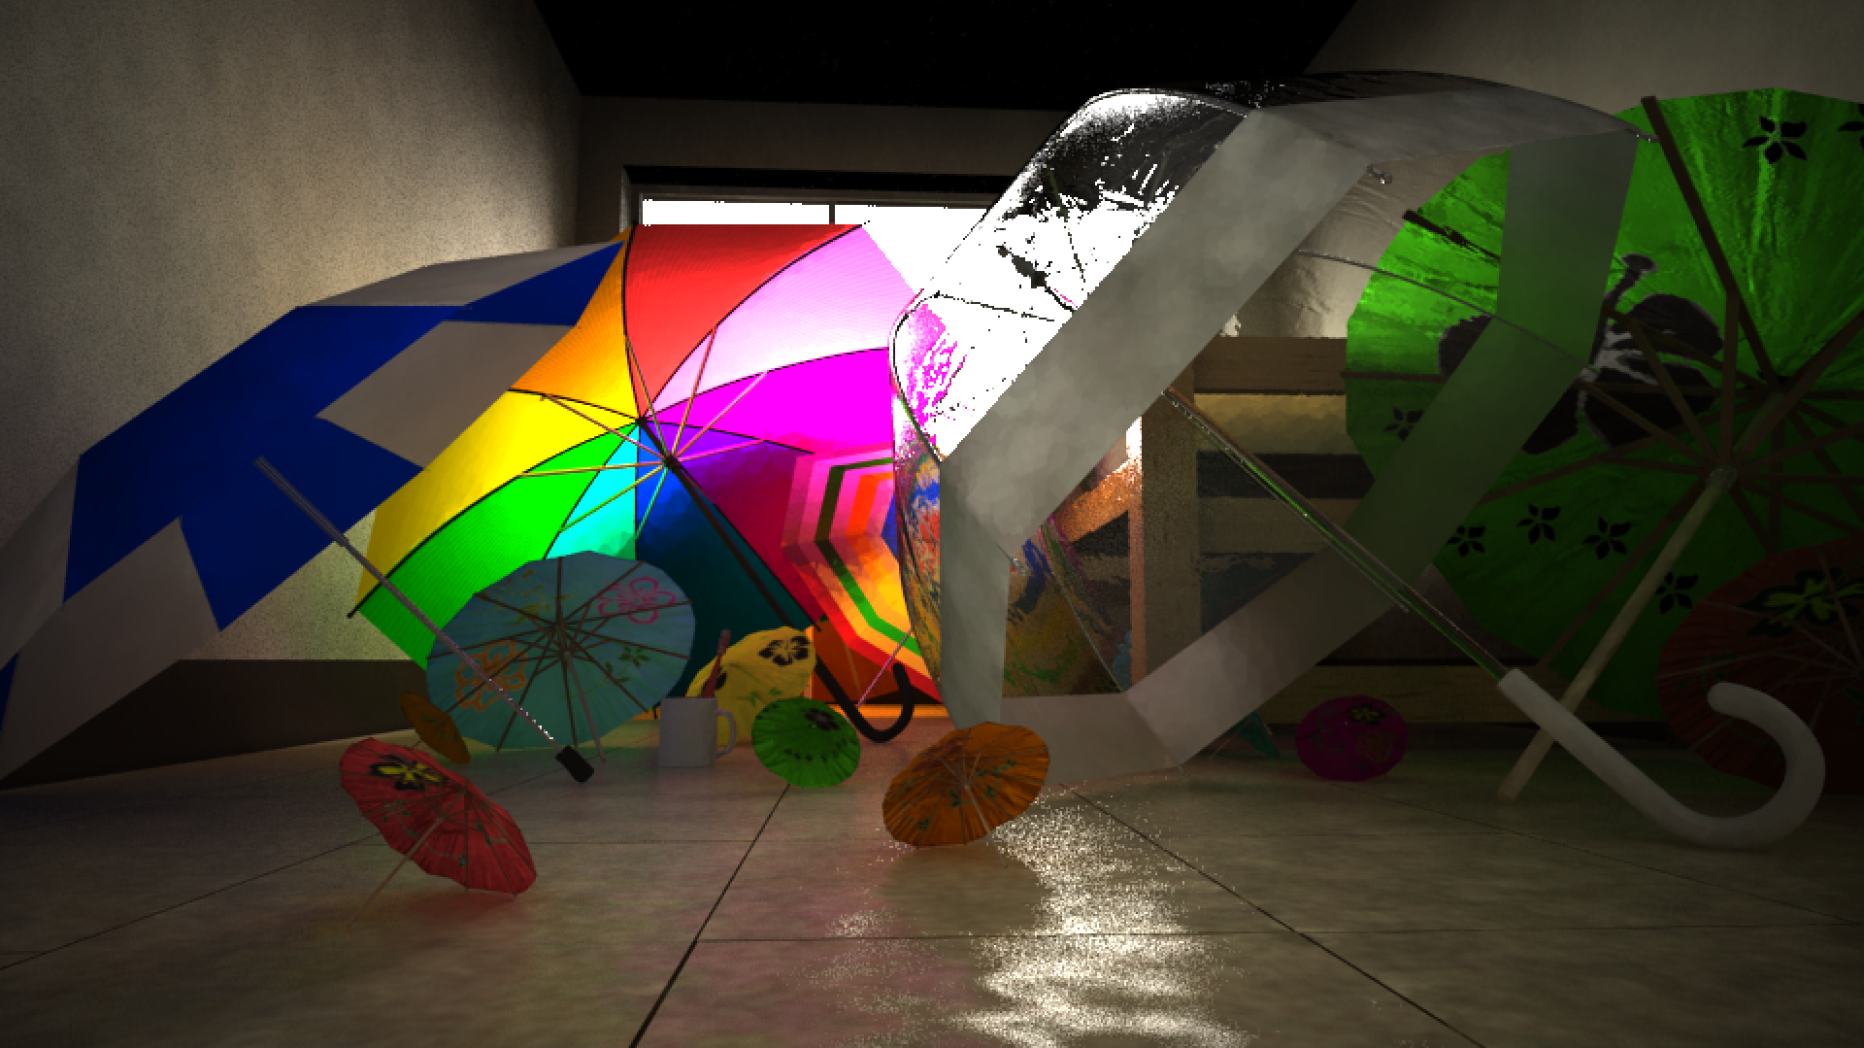 CGI graphic of several umbrellas all of different size, shape and color in a room with natural lighting.